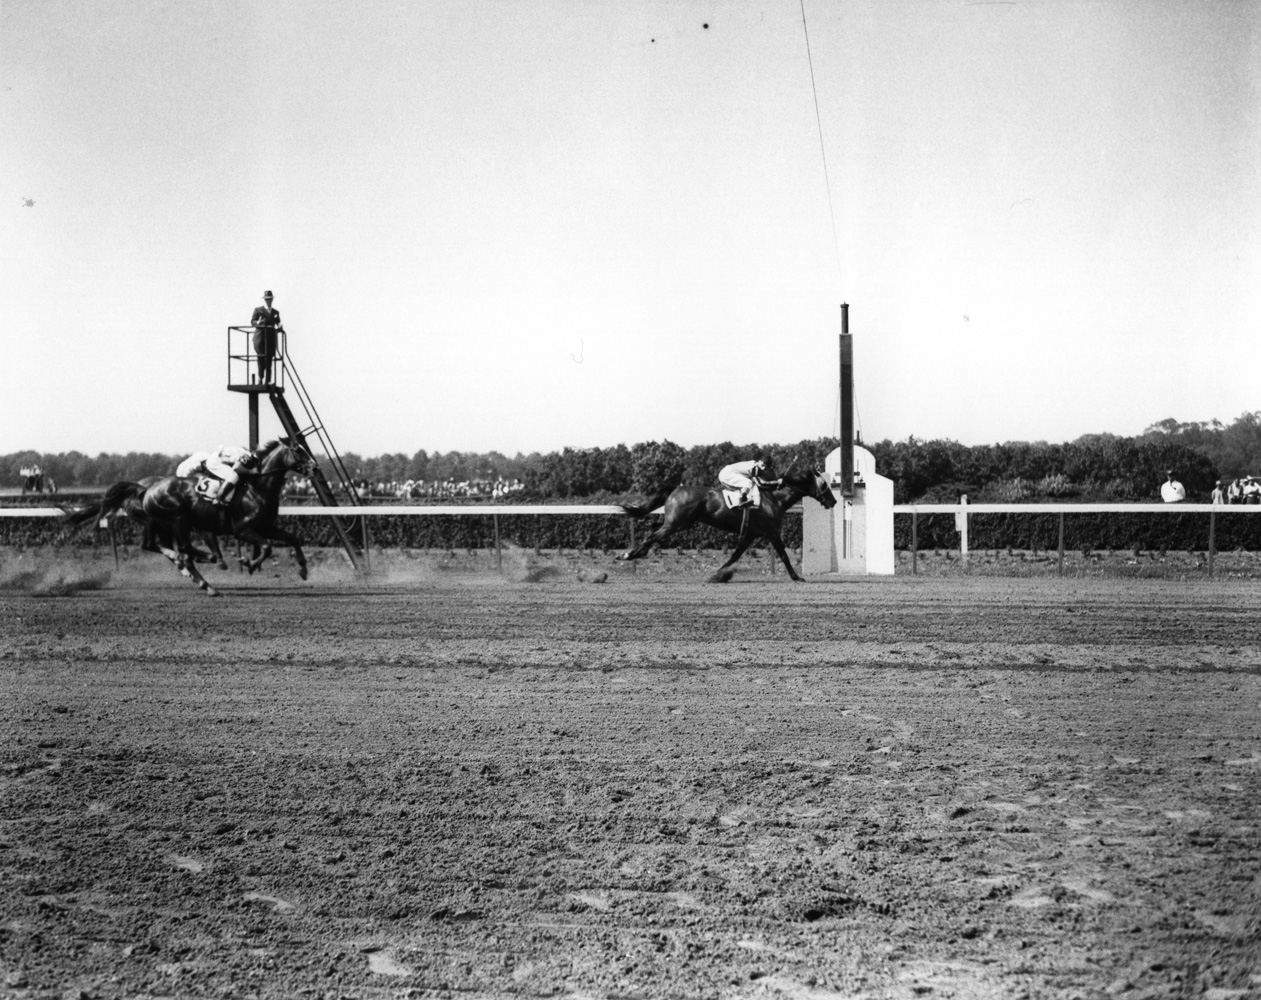 Devil Diver (Eddie Arcaro up) winning the 1945 Suburban Handicap at Belmont Park (Keeneland Library Morgan Collection/Museum Collection)